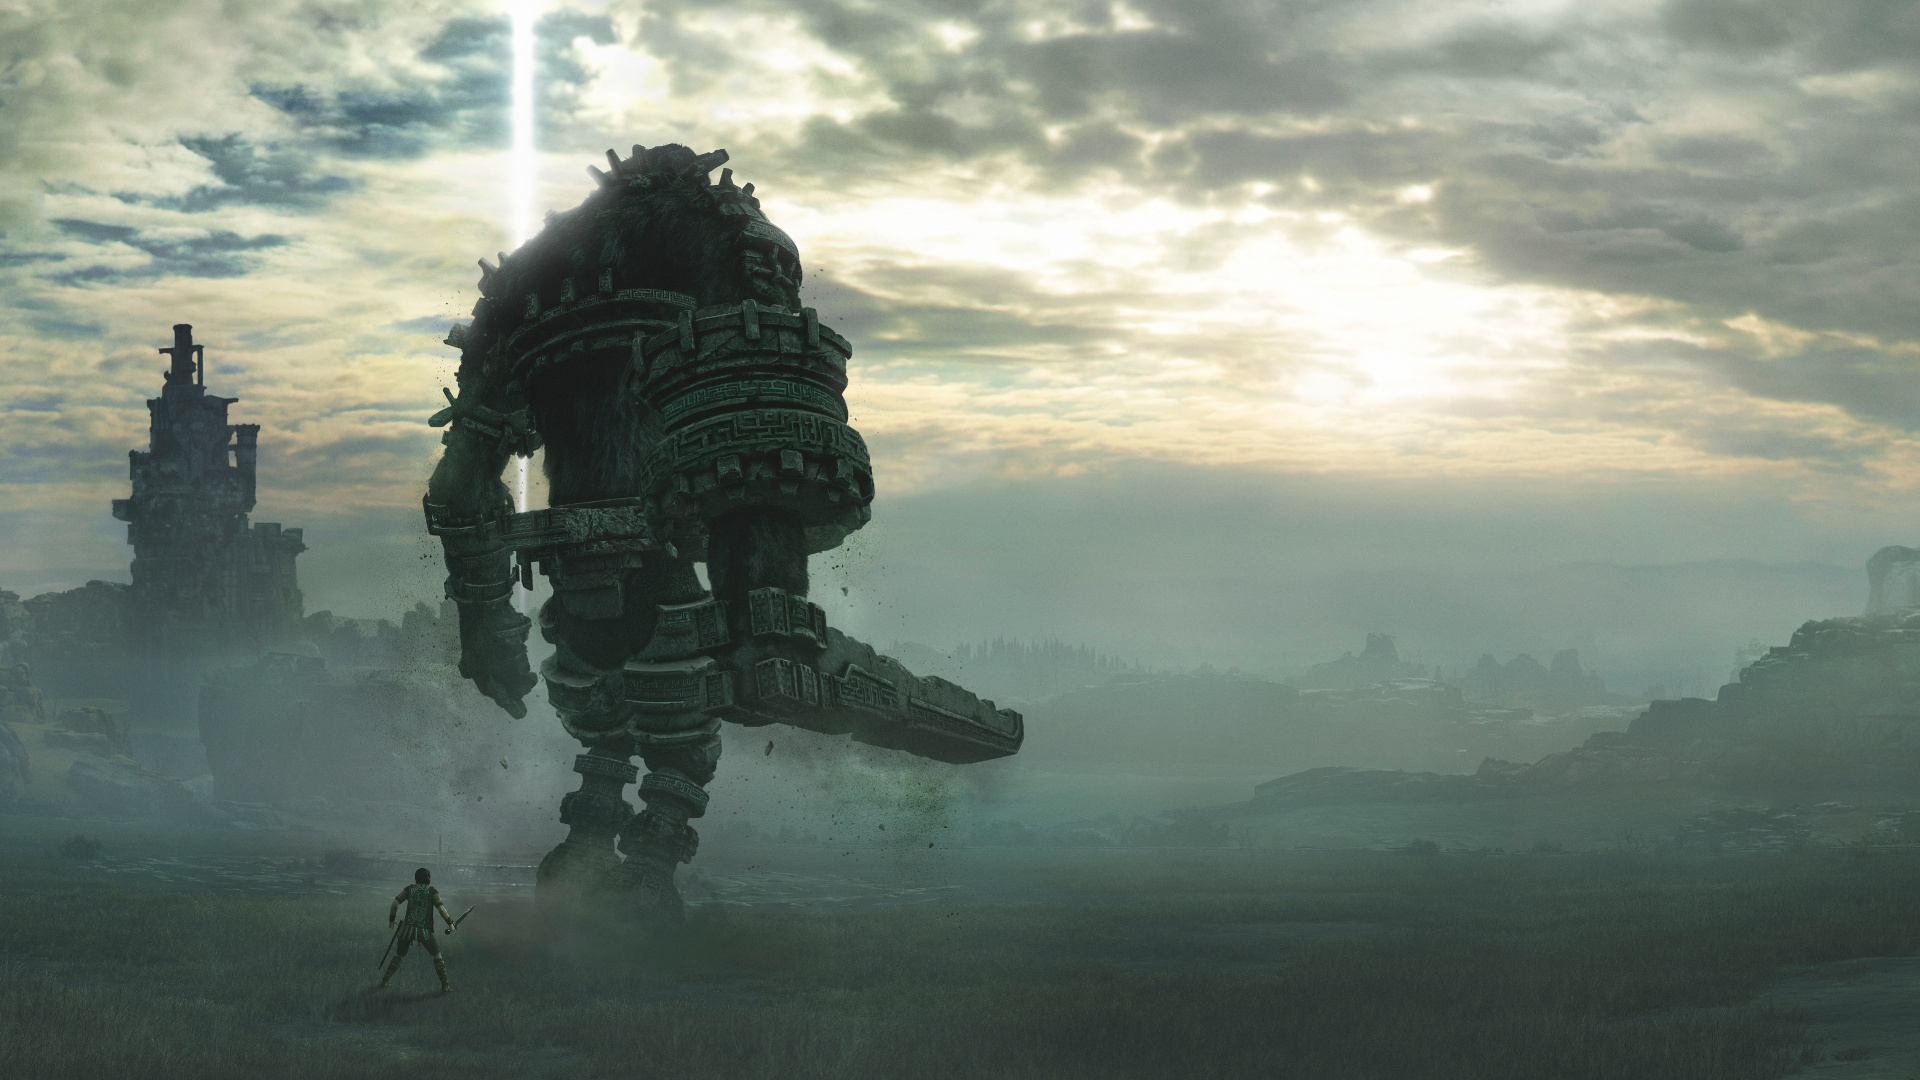 Black and Gray Robot on Green Grass Field During Daytime. Wallpaper in 1920x1080 Resolution